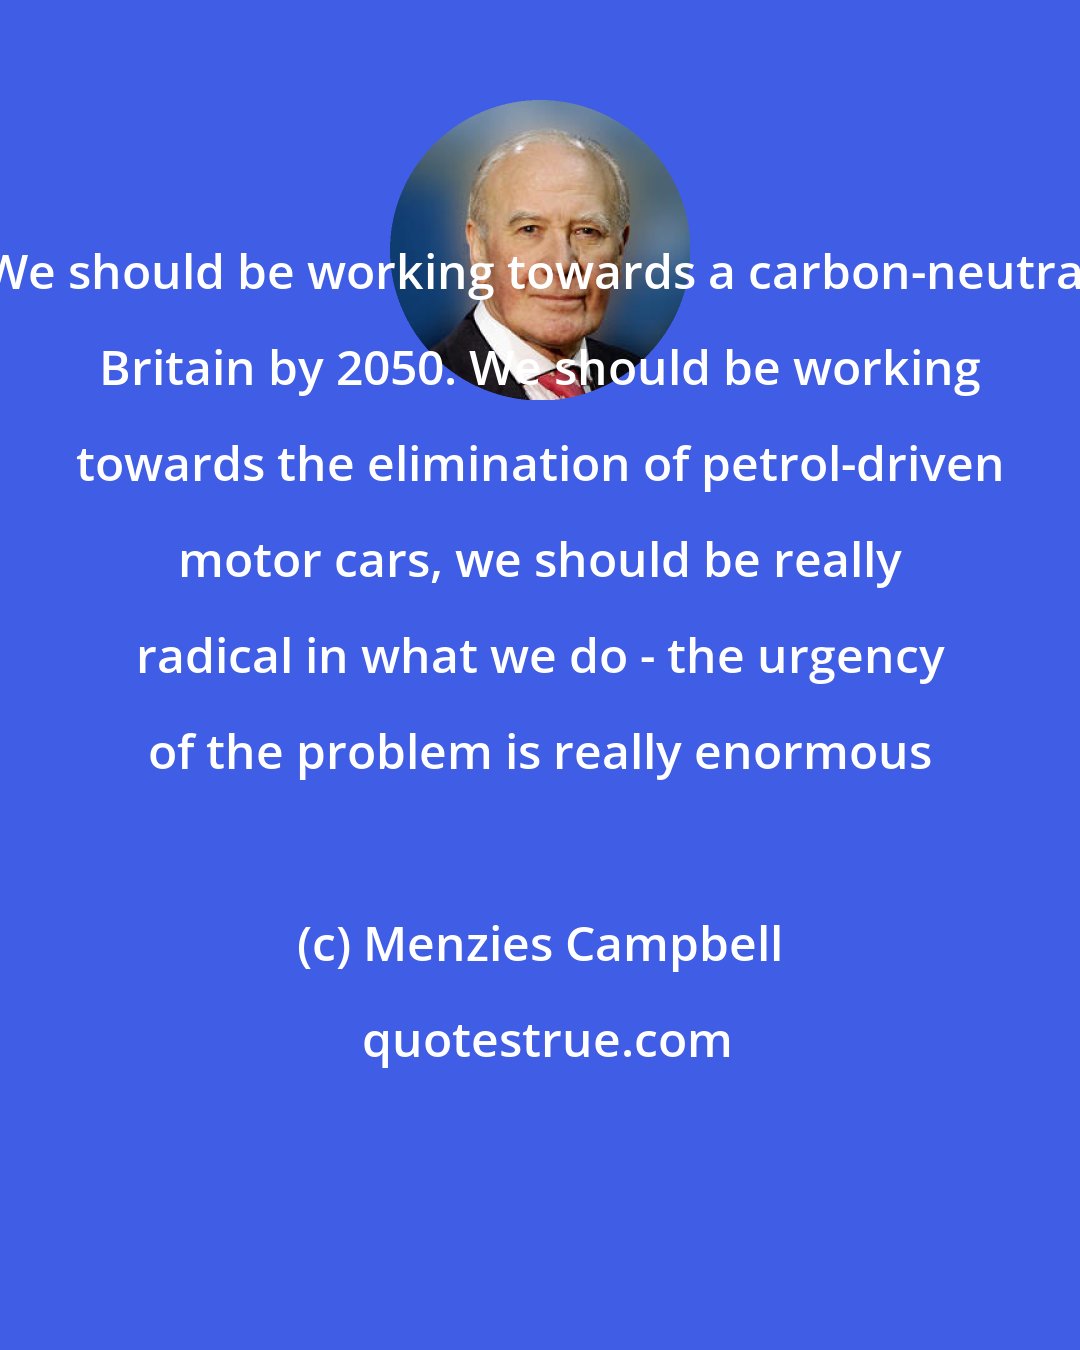 Menzies Campbell: We should be working towards a carbon-neutral Britain by 2050. We should be working towards the elimination of petrol-driven motor cars, we should be really radical in what we do - the urgency of the problem is really enormous